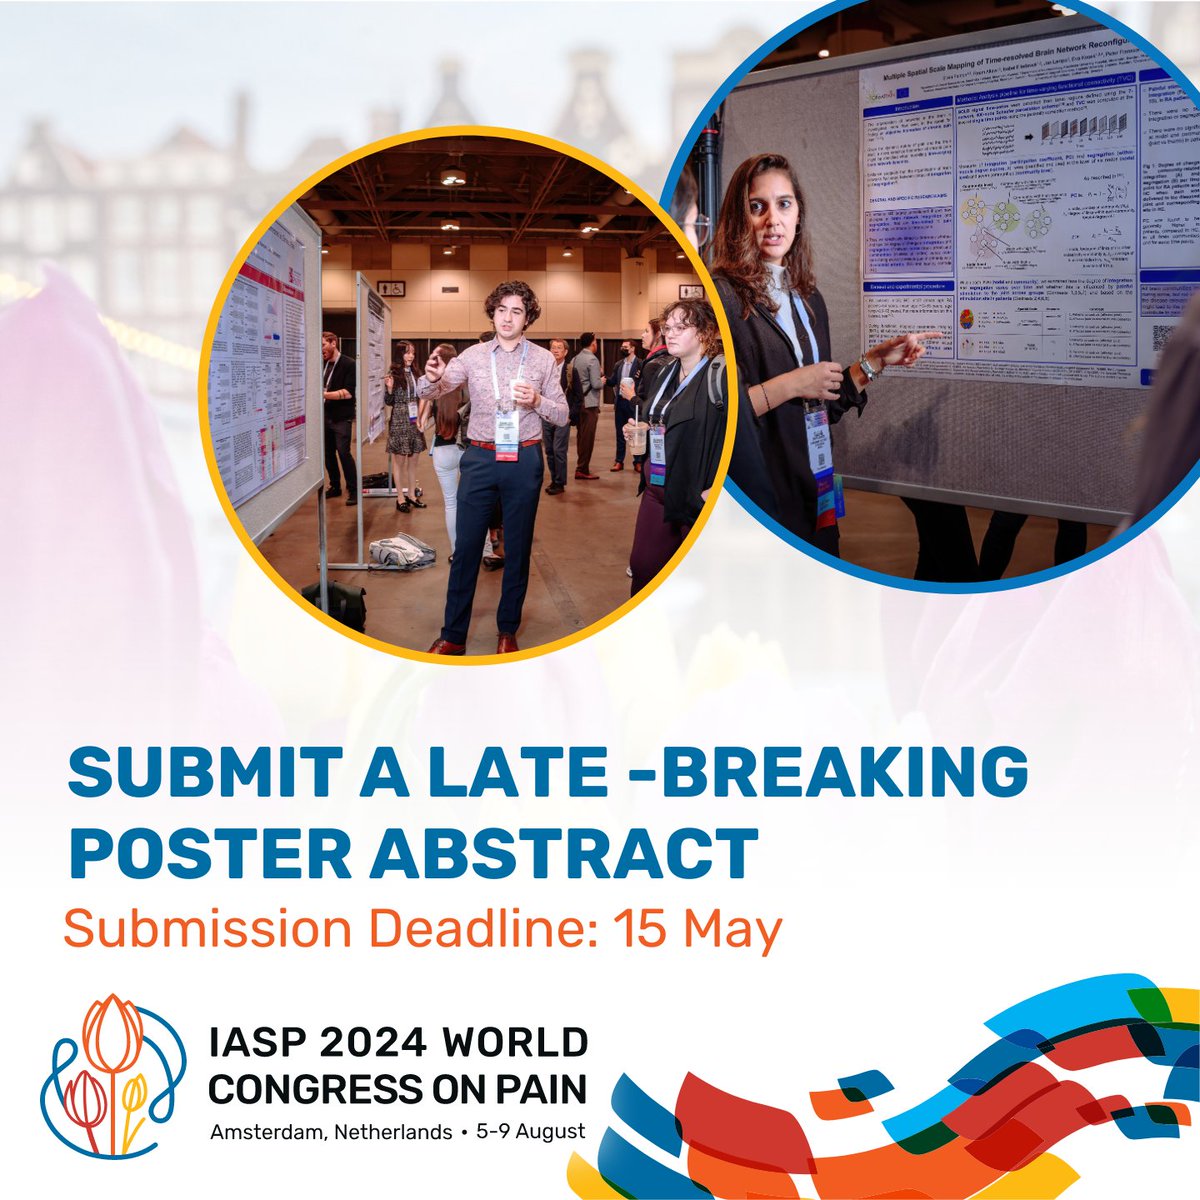 Didn’t have a chance to submit your poster abstract for the upcoming #WC2024? Late-breaking poster abstract submissions are open now through 15 May! More info and submission details can be found here bit.ly/3xLj6n3 #PRF